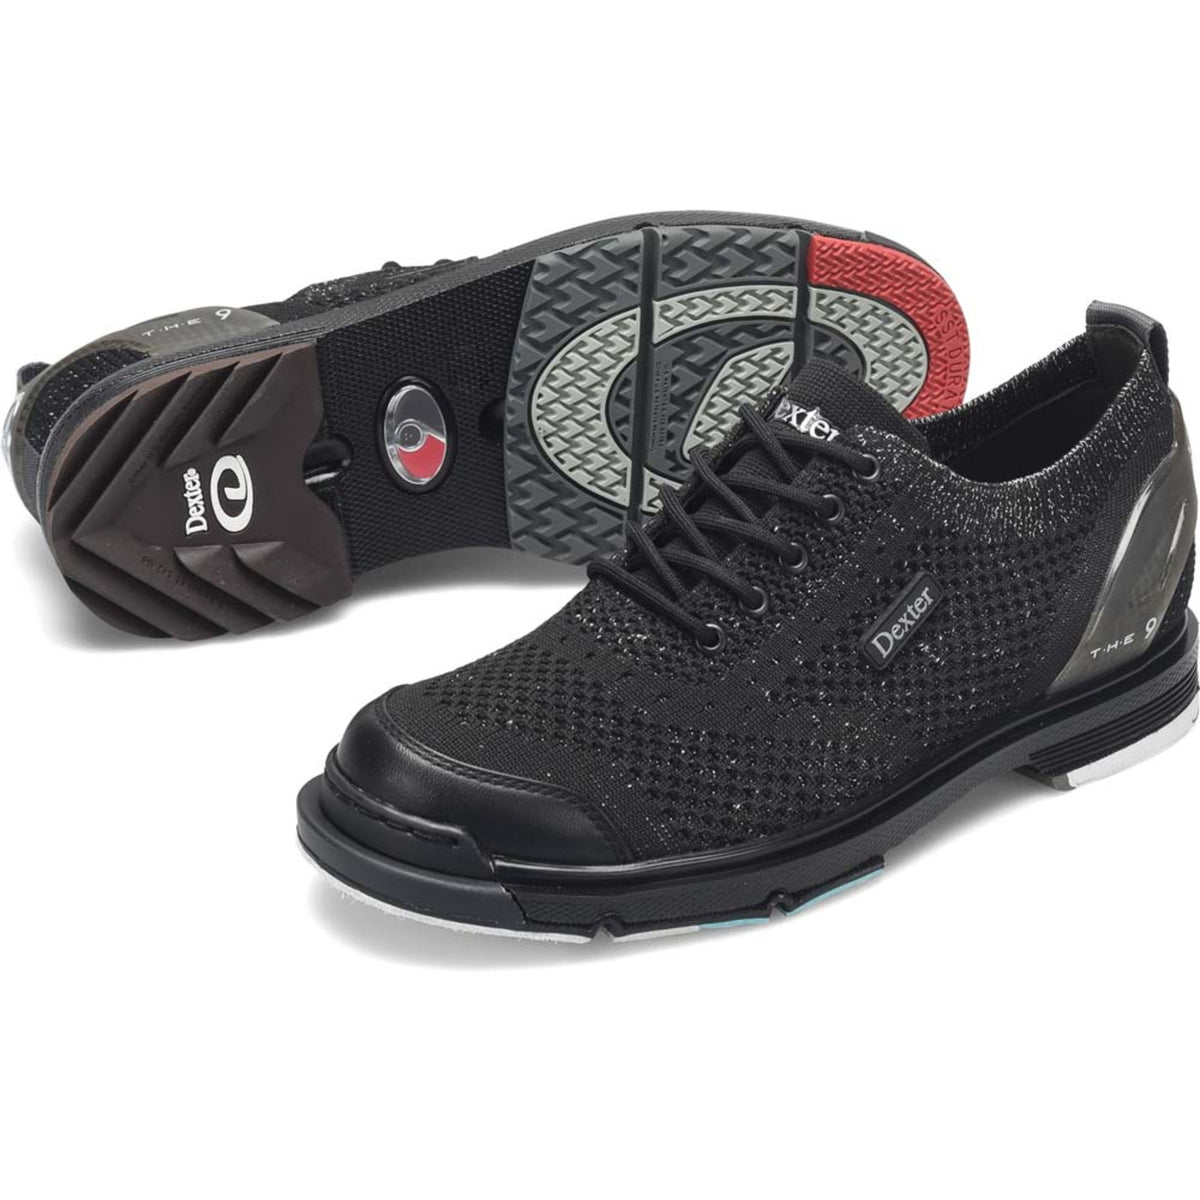 The C-9 Knit St Black/ Silver Shoes